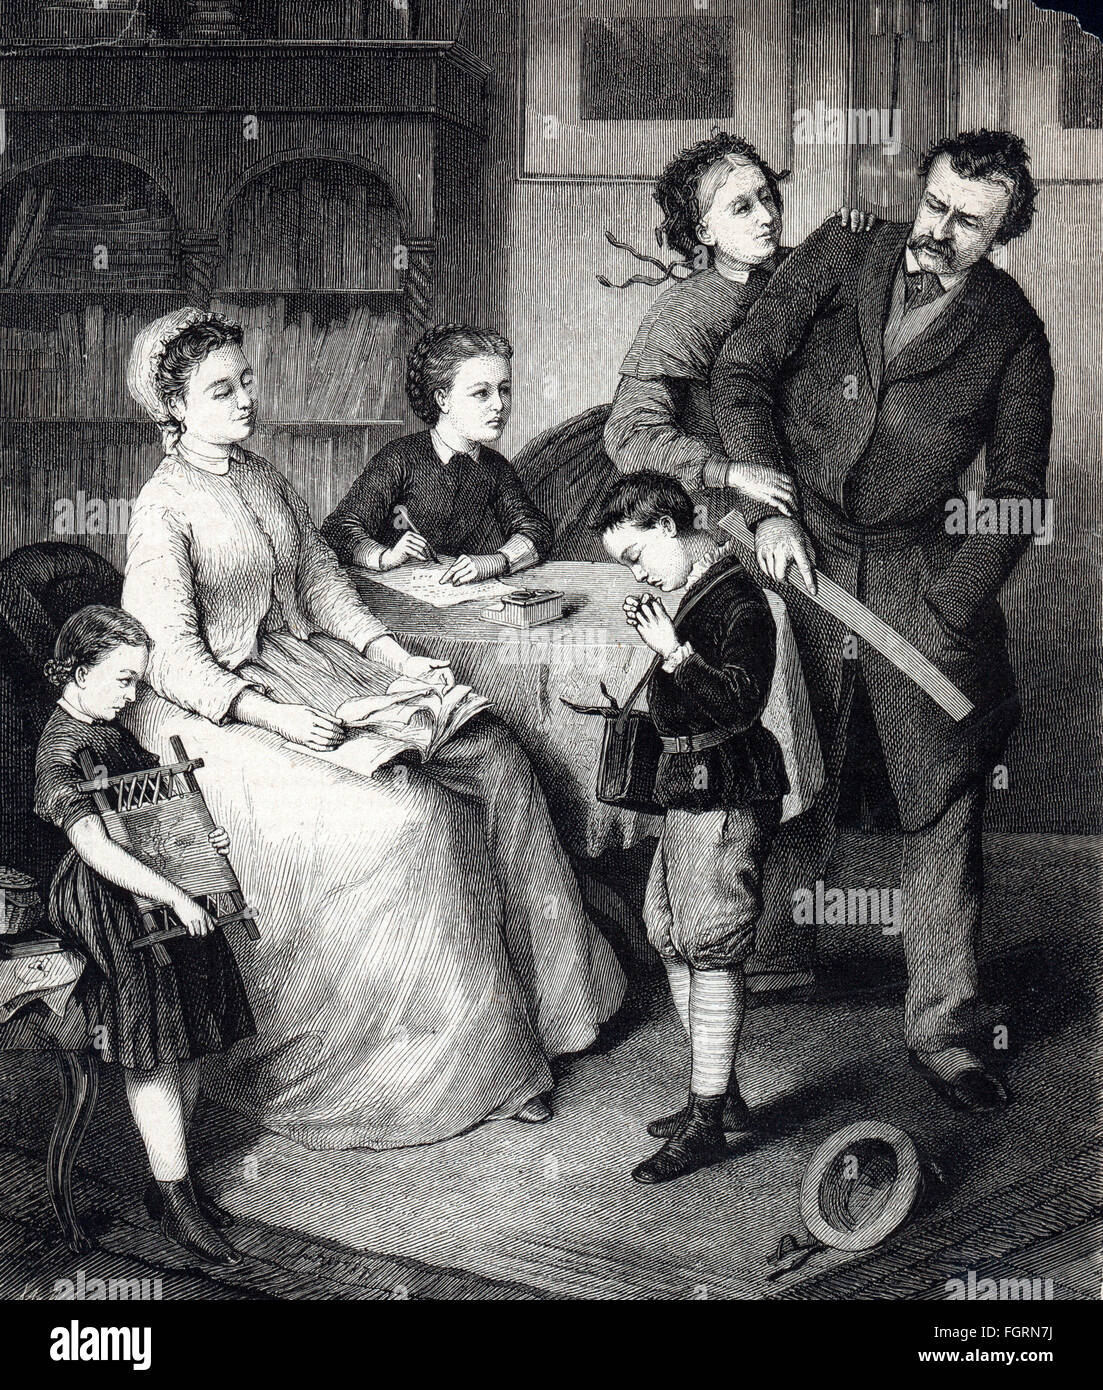 people, family, scenes, 'Wieder eine schlechte Oster-Censur!' (Yet Another Bad Grade for Easter!', wood engraving, out of: 'Die Gartenlaube', issue 52, Leipzig, 1873, Additional-Rights-Clearences-Not Available Stock Photo